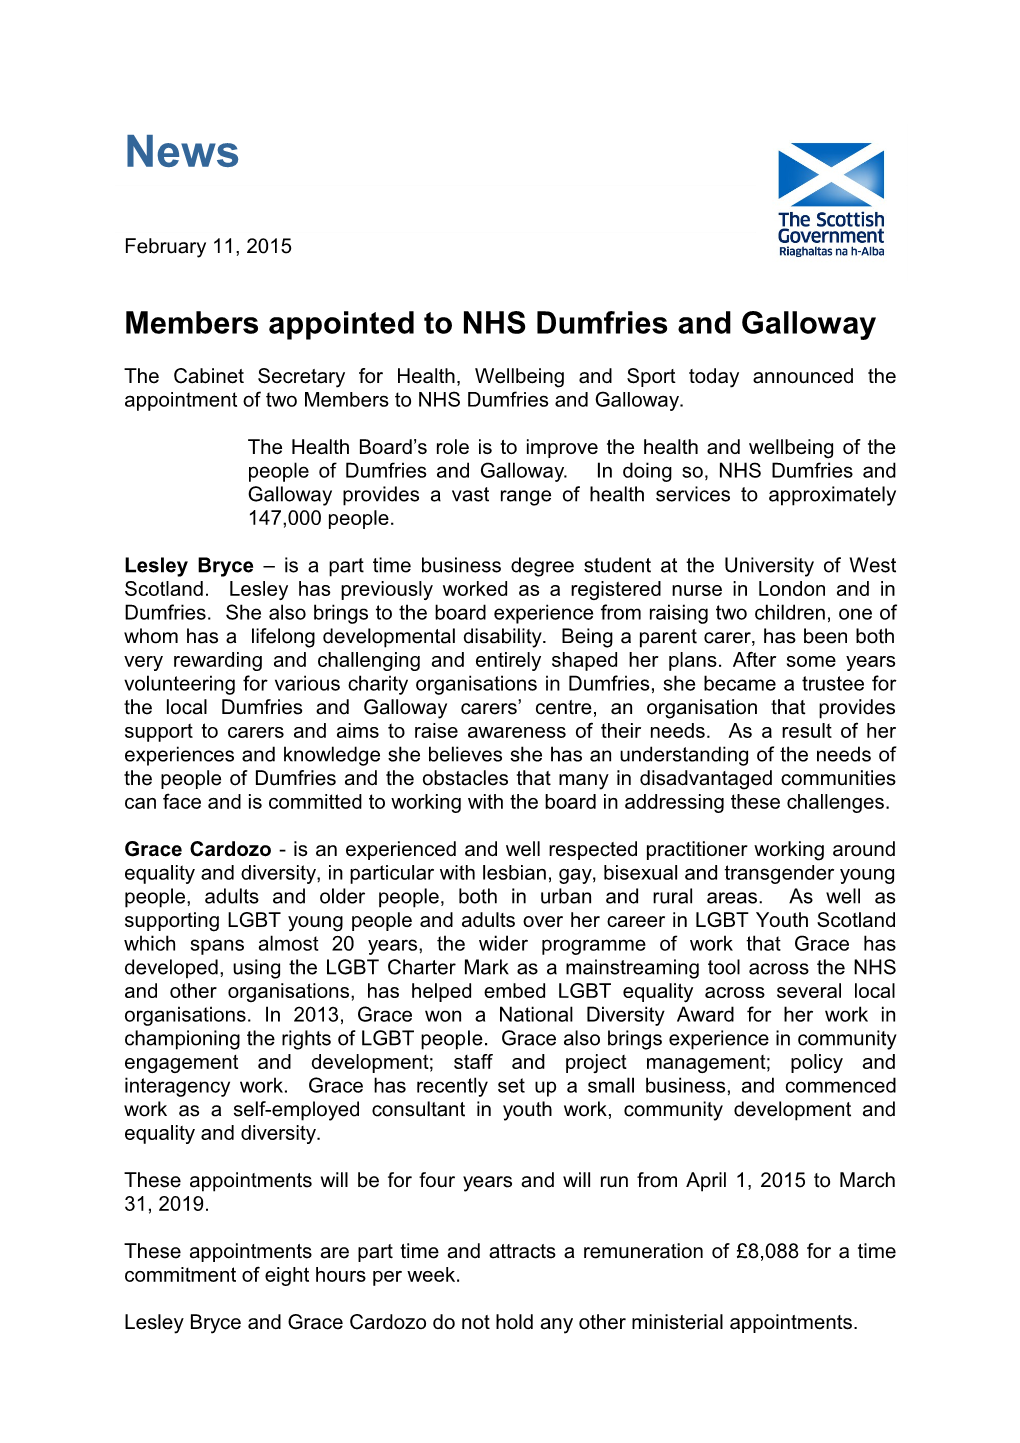 Members Appointed to NHS Dumfries and Galloway